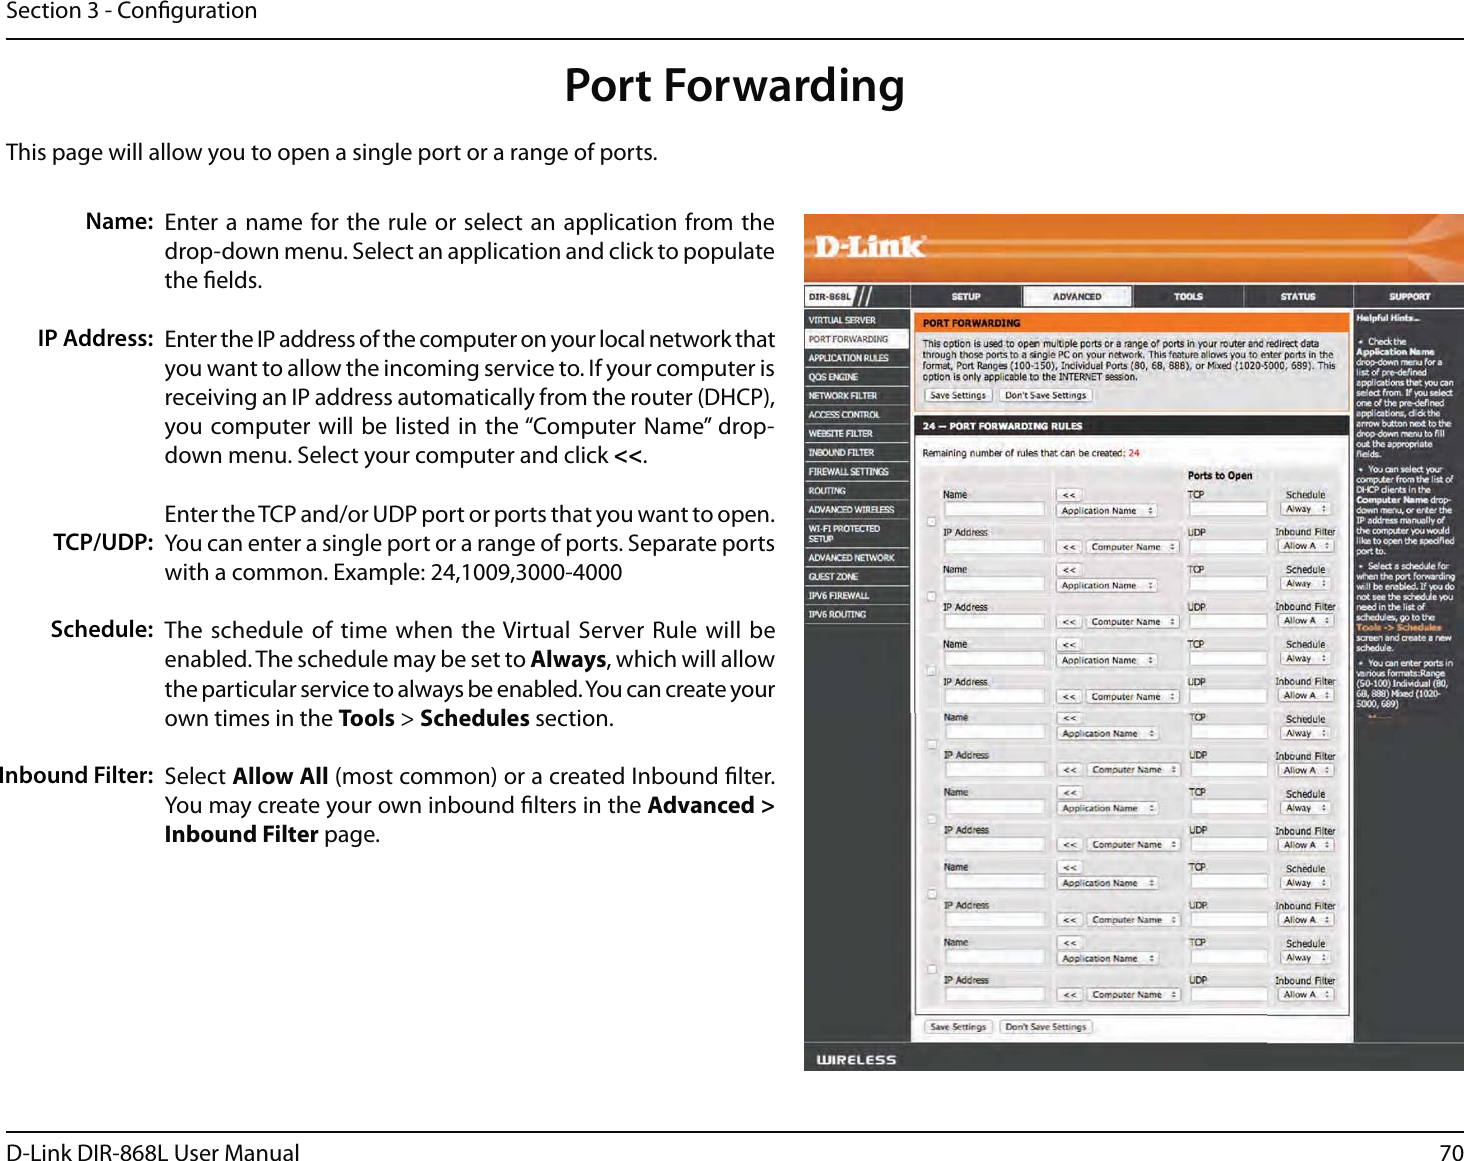 70D-Link DIR-868L User ManualSection 3 - CongurationThis page will allow you to open a single port or a range of ports.Port ForwardingEnter a name for the rule or select an application from the drop-down menu. Select an application and click to populate the elds.Enter the IP address of the computer on your local network that you want to allow the incoming service to. If your computer is receiving an IP address automatically from the router (DHCP), you computer will be listed in the “Computer Name” drop-down menu. Select your computer and click &lt;&lt;. Enter the TCP and/or UDP port or ports that you want to open. You can enter a single port or a range of ports. Separate ports with a common. Example: 24,1009,3000-4000The schedule of time when the Virtual Server Rule will be enabled. The schedule may be set to Always, which will allow the particular service to always be enabled. You can create your own times in the Tools &gt; Schedules section.Select Allow All (most common) or a created Inbound lter. You may create your own inbound lters in the Advanced &gt; Inbound Filter page.Name:IP Address:TCP/UDP:Schedule:Inbound Filter: